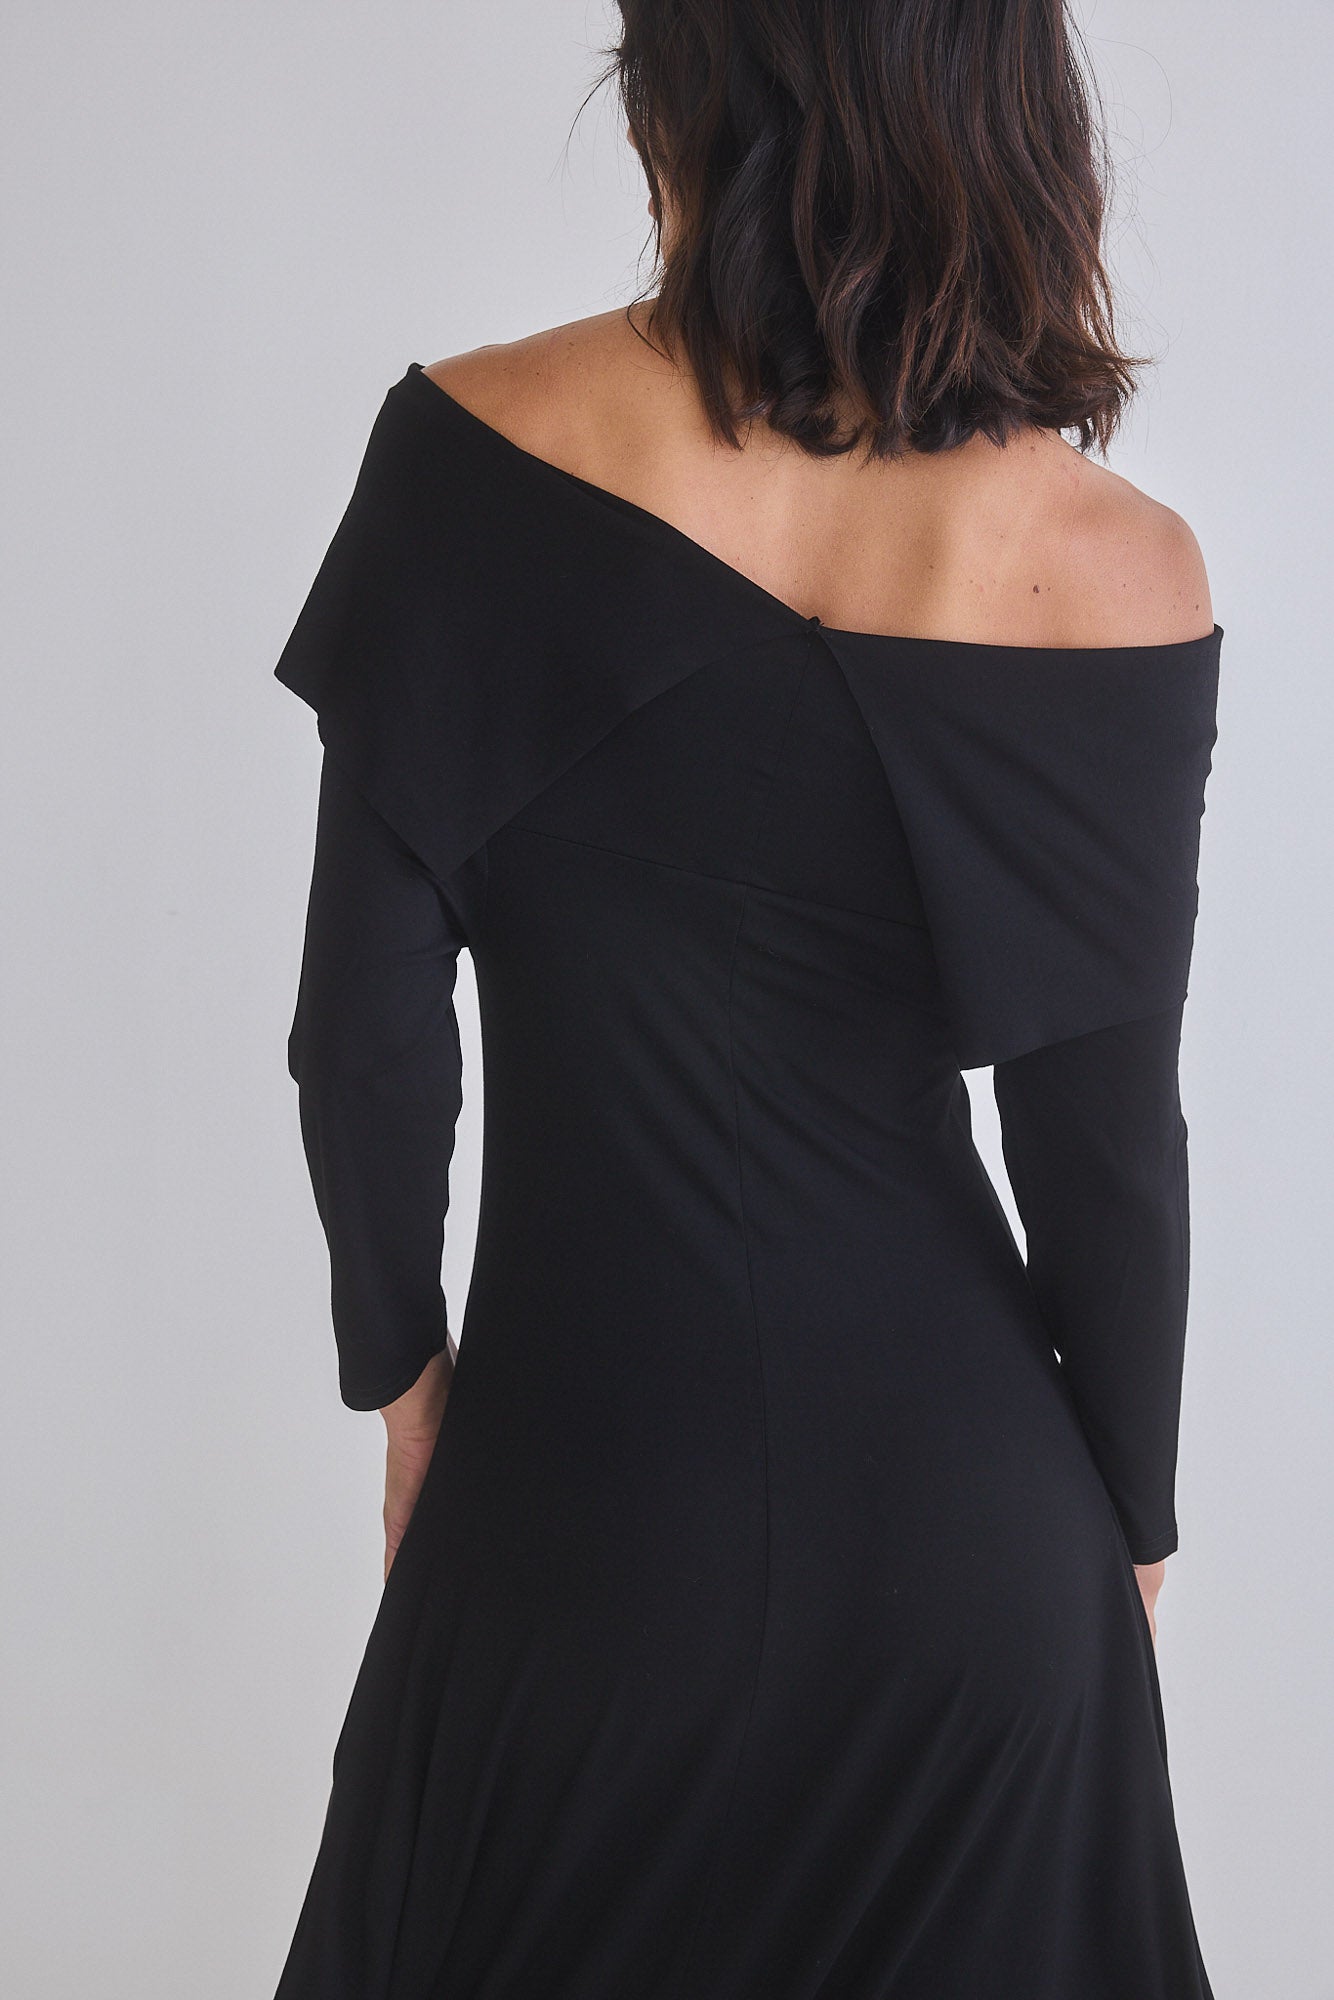 Iconic Off The Shoulder Dress